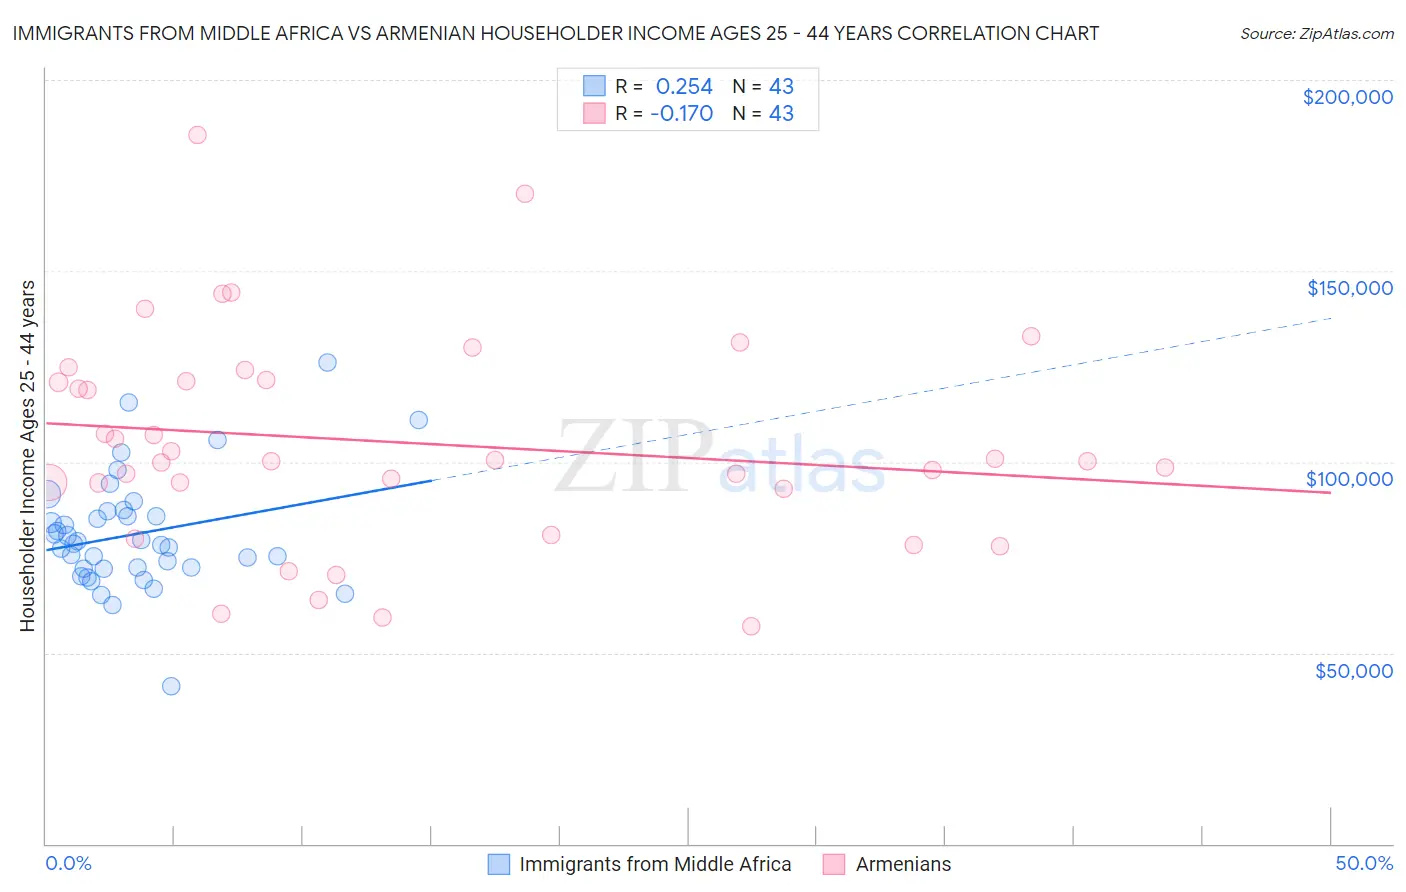 Immigrants from Middle Africa vs Armenian Householder Income Ages 25 - 44 years